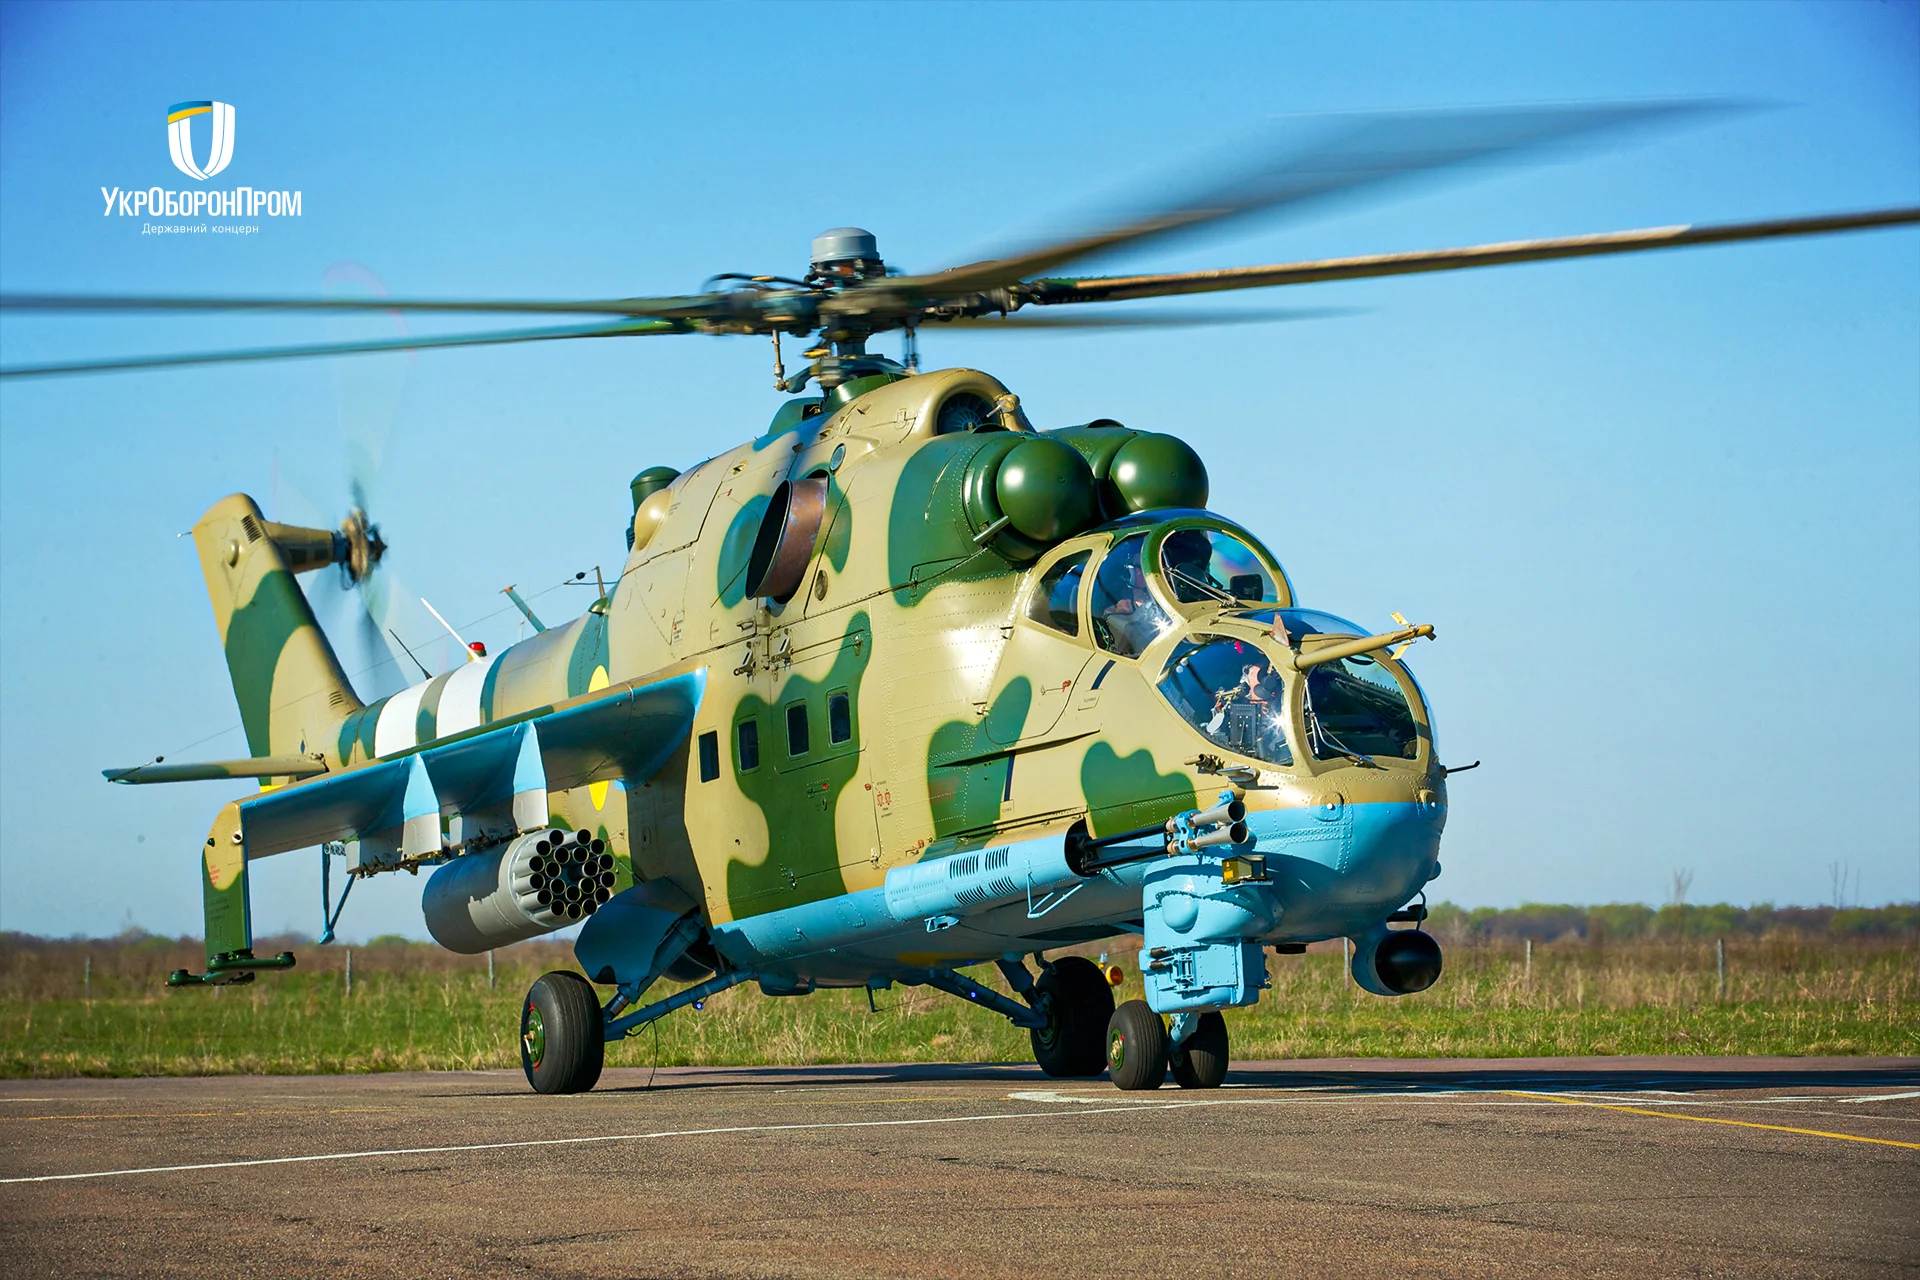 The Mi-24PU1 of the Armed Forces of Ukraine Defense Express North Macedonia to Give Ukraine Mi-24 Helicopters and Receive 139 Million Dollars for New Ones